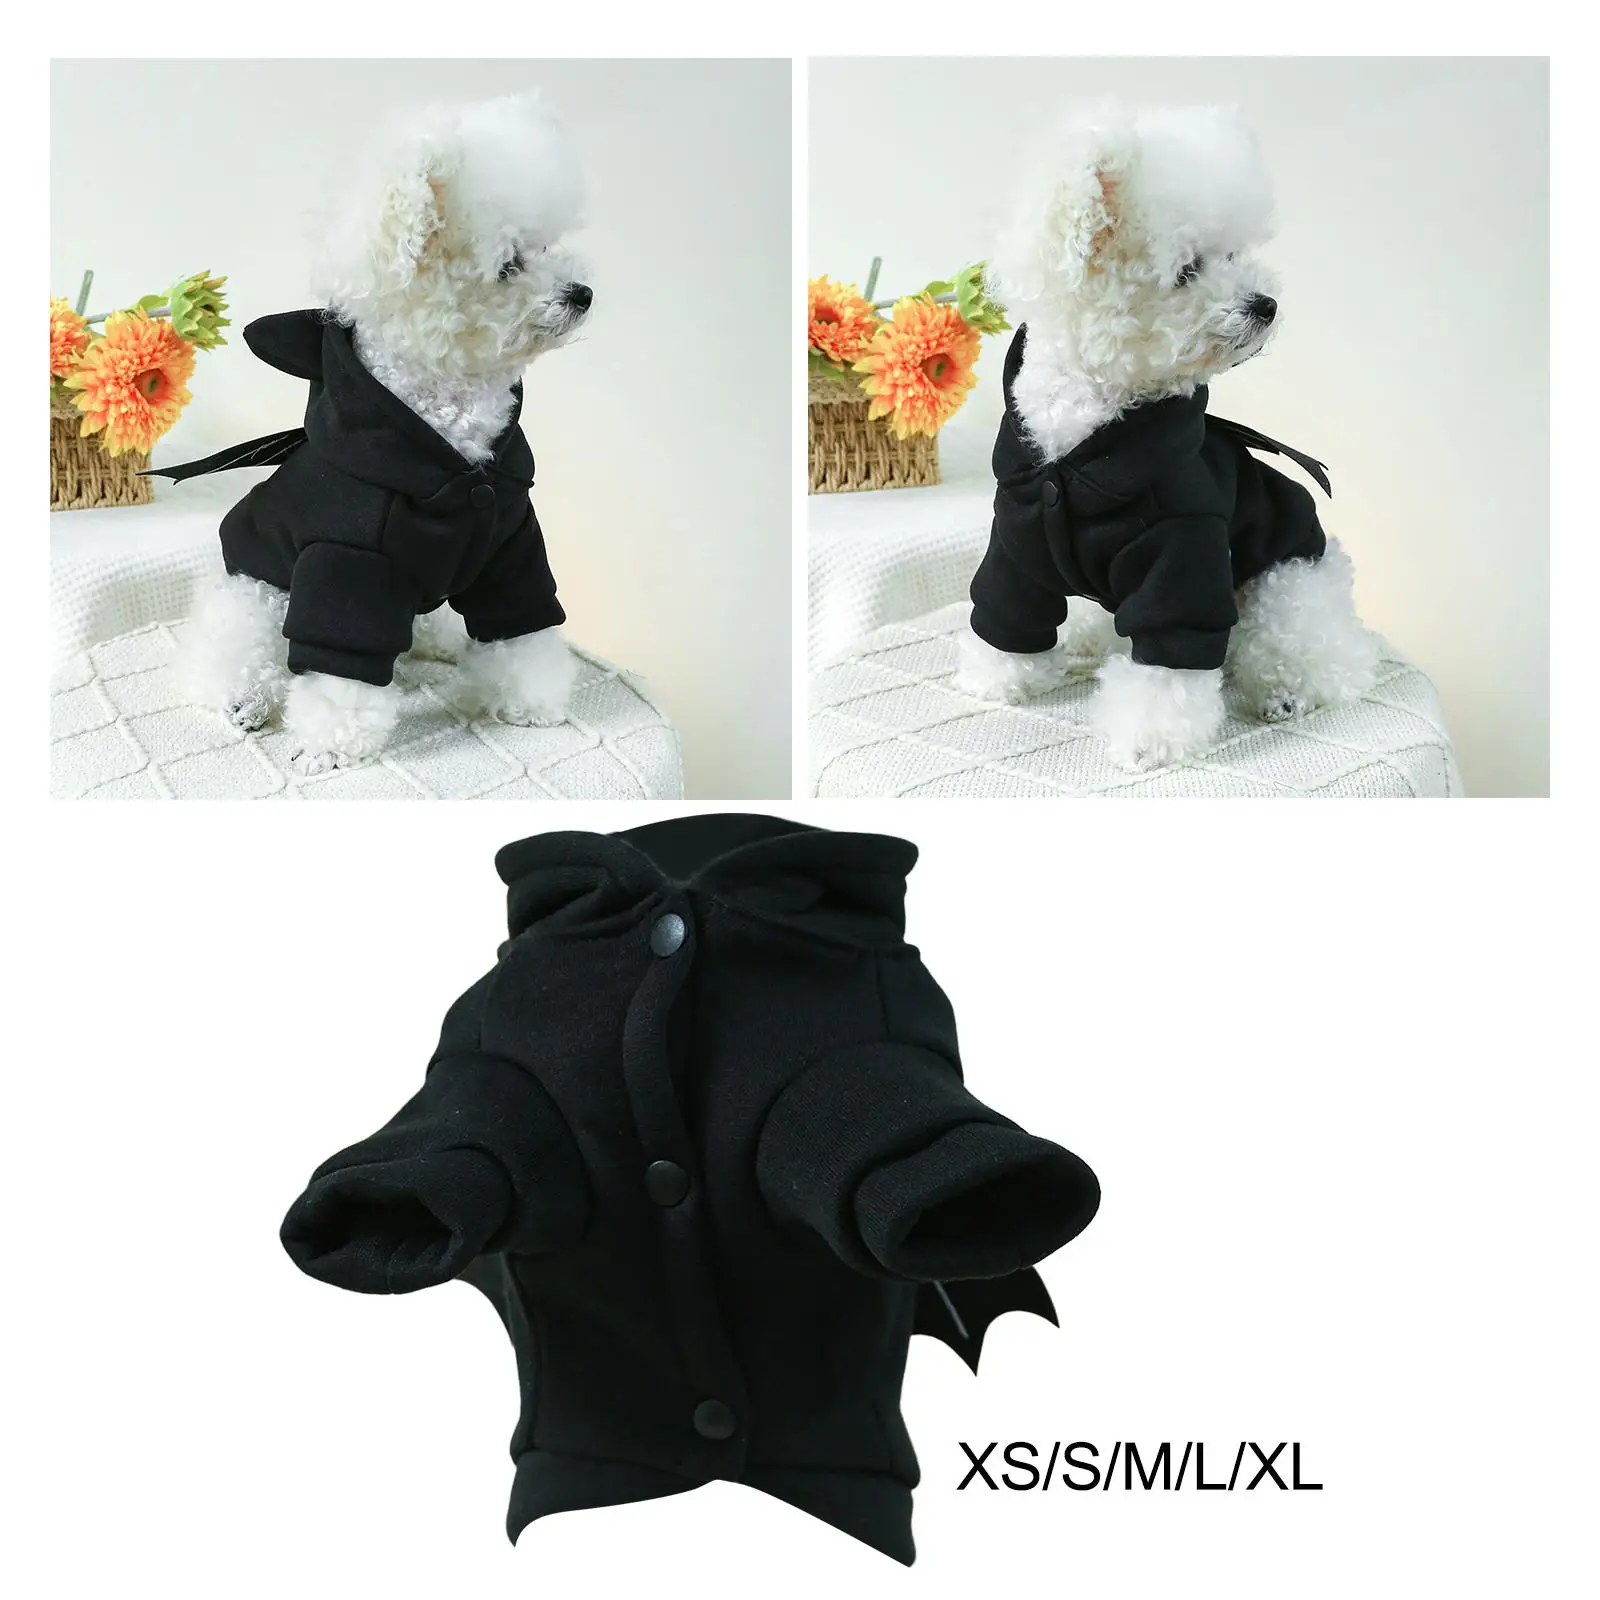 Pet Costume Cat Cosplay Halloween Dog Costume Funny Dress up Decor Cute Accessories Kitten Puppy Apparel Dog Clothes for Holiday